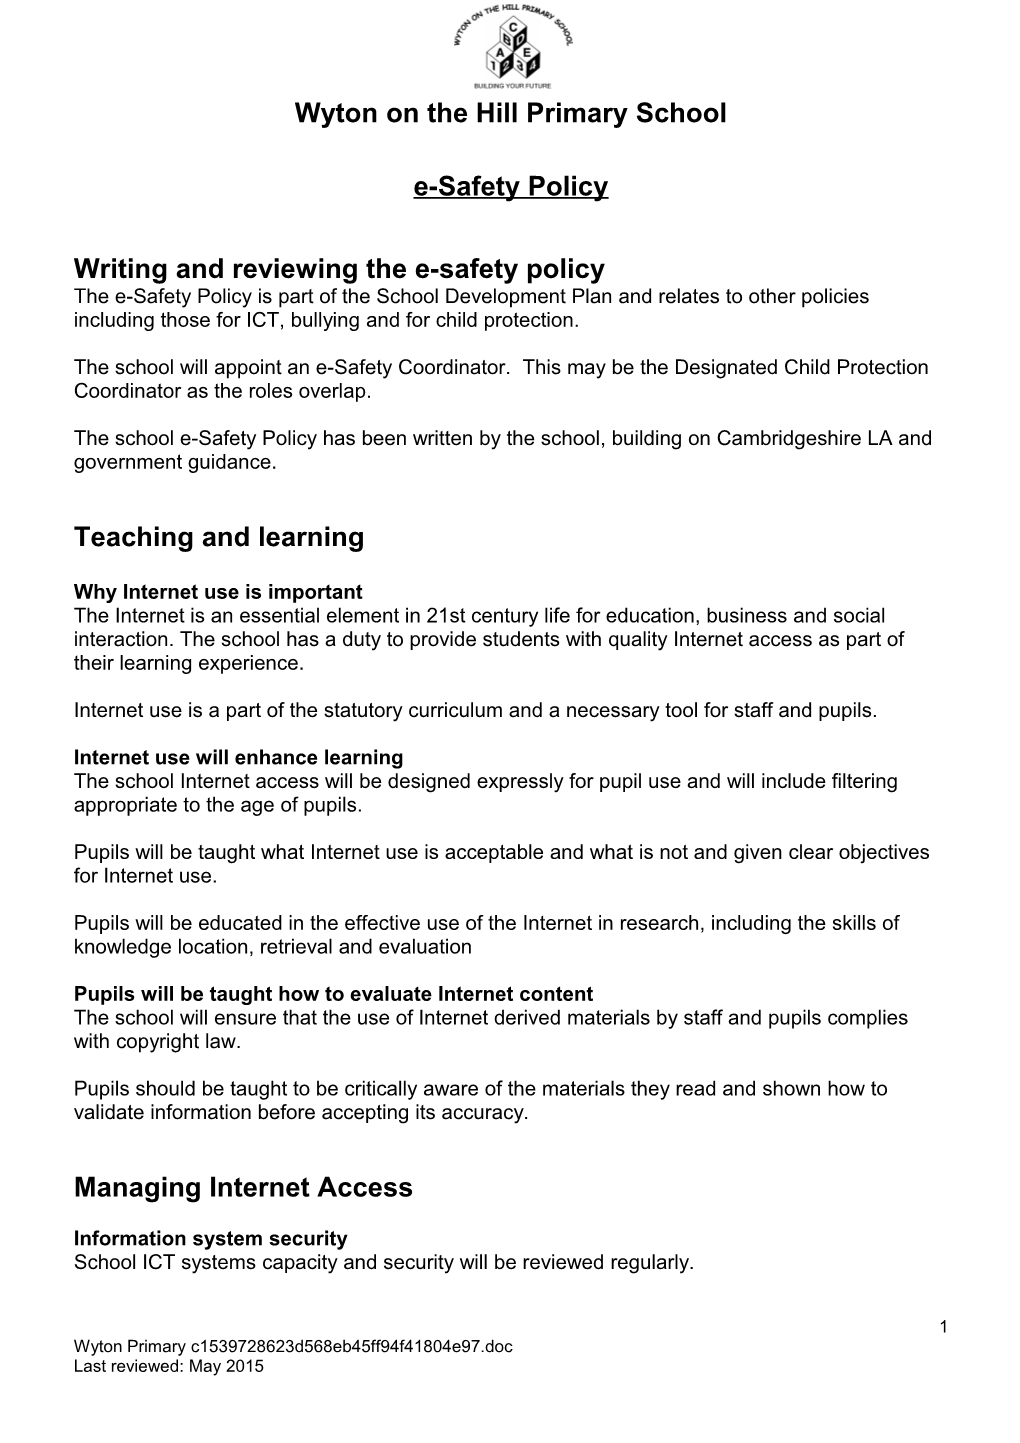 Writing and Reviewing the E-Safety Policy